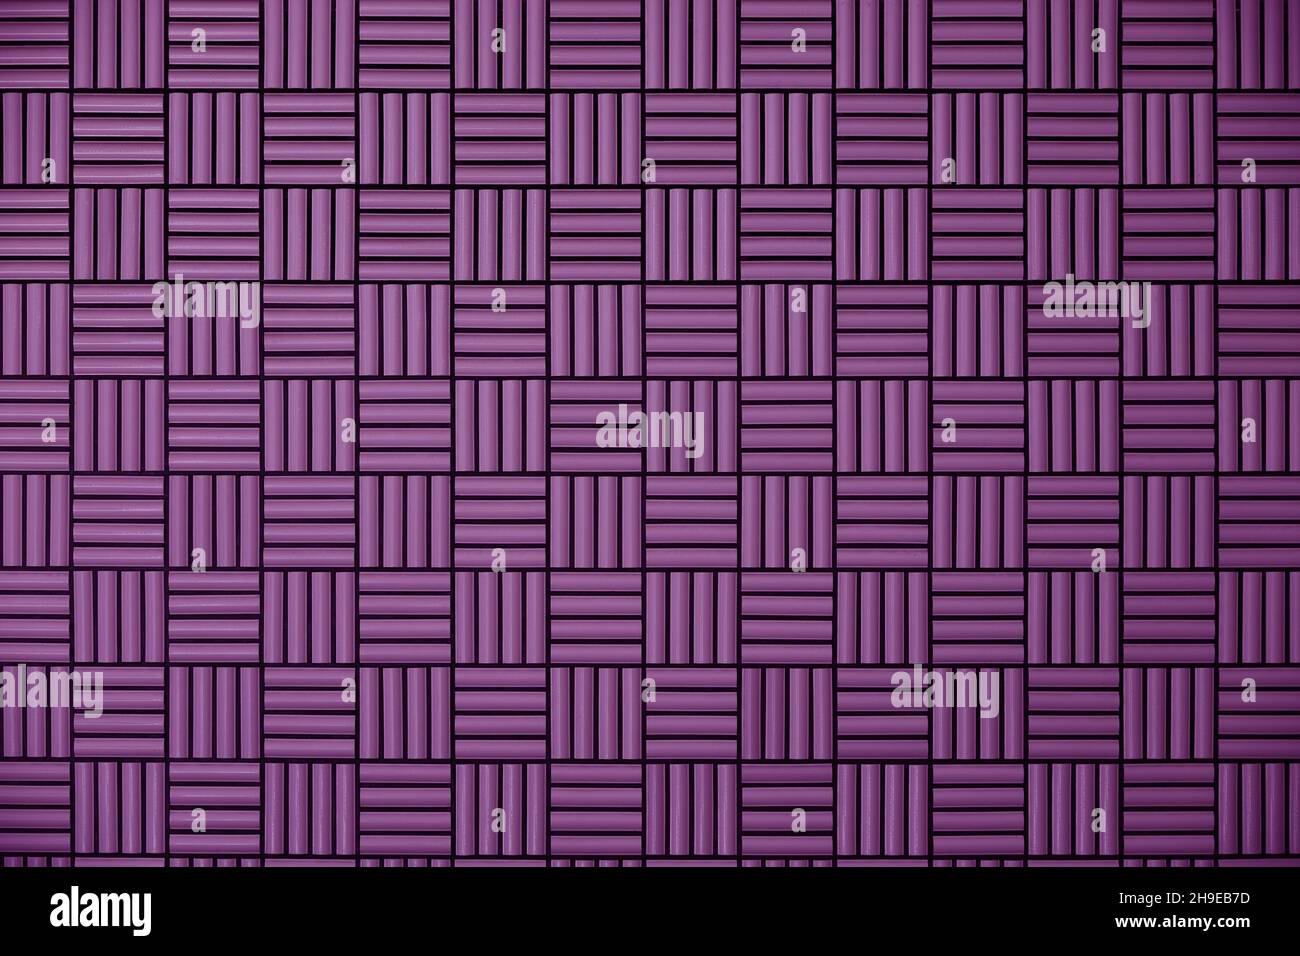 Purple tile wall with geometric pattern as background material Stock Photo